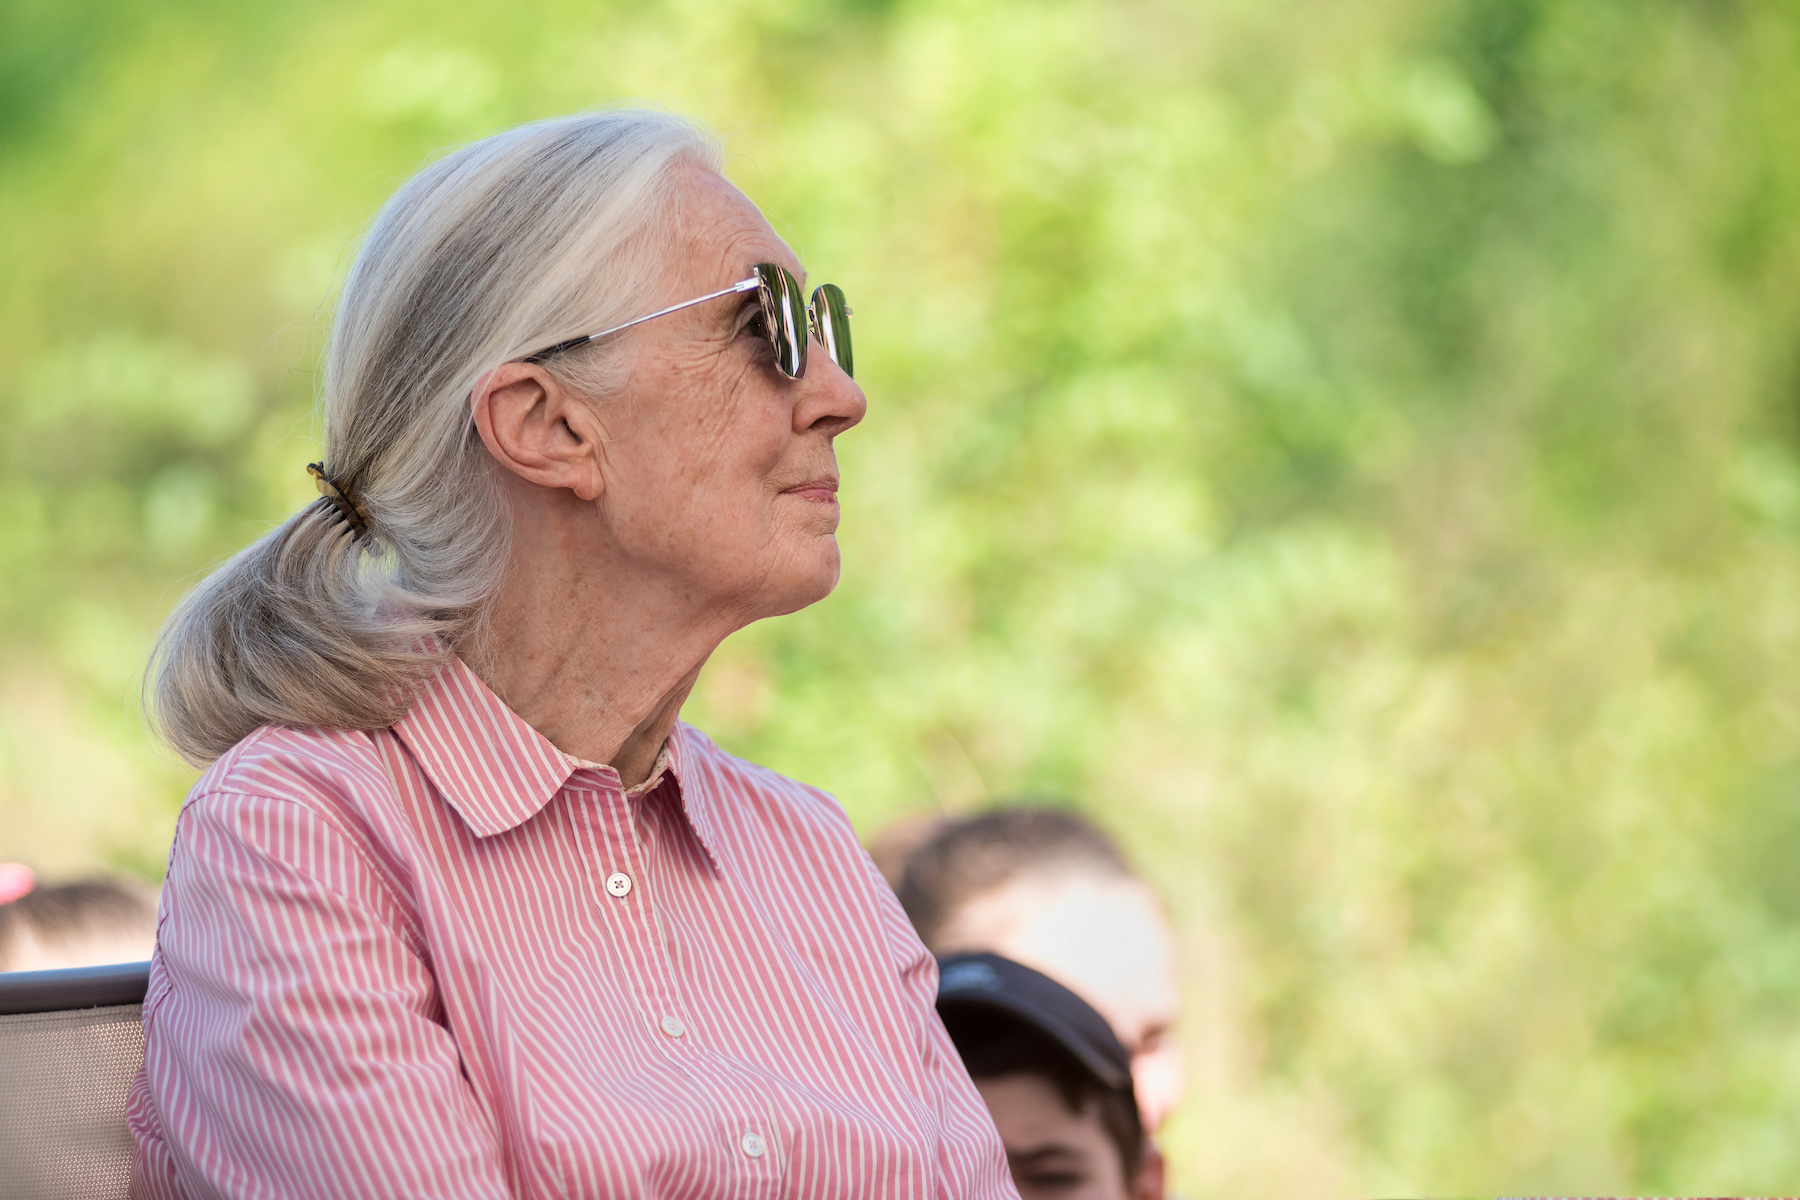 An older woman wearing a pink shirt and sunglasses looks out to the right against a blurry green background.